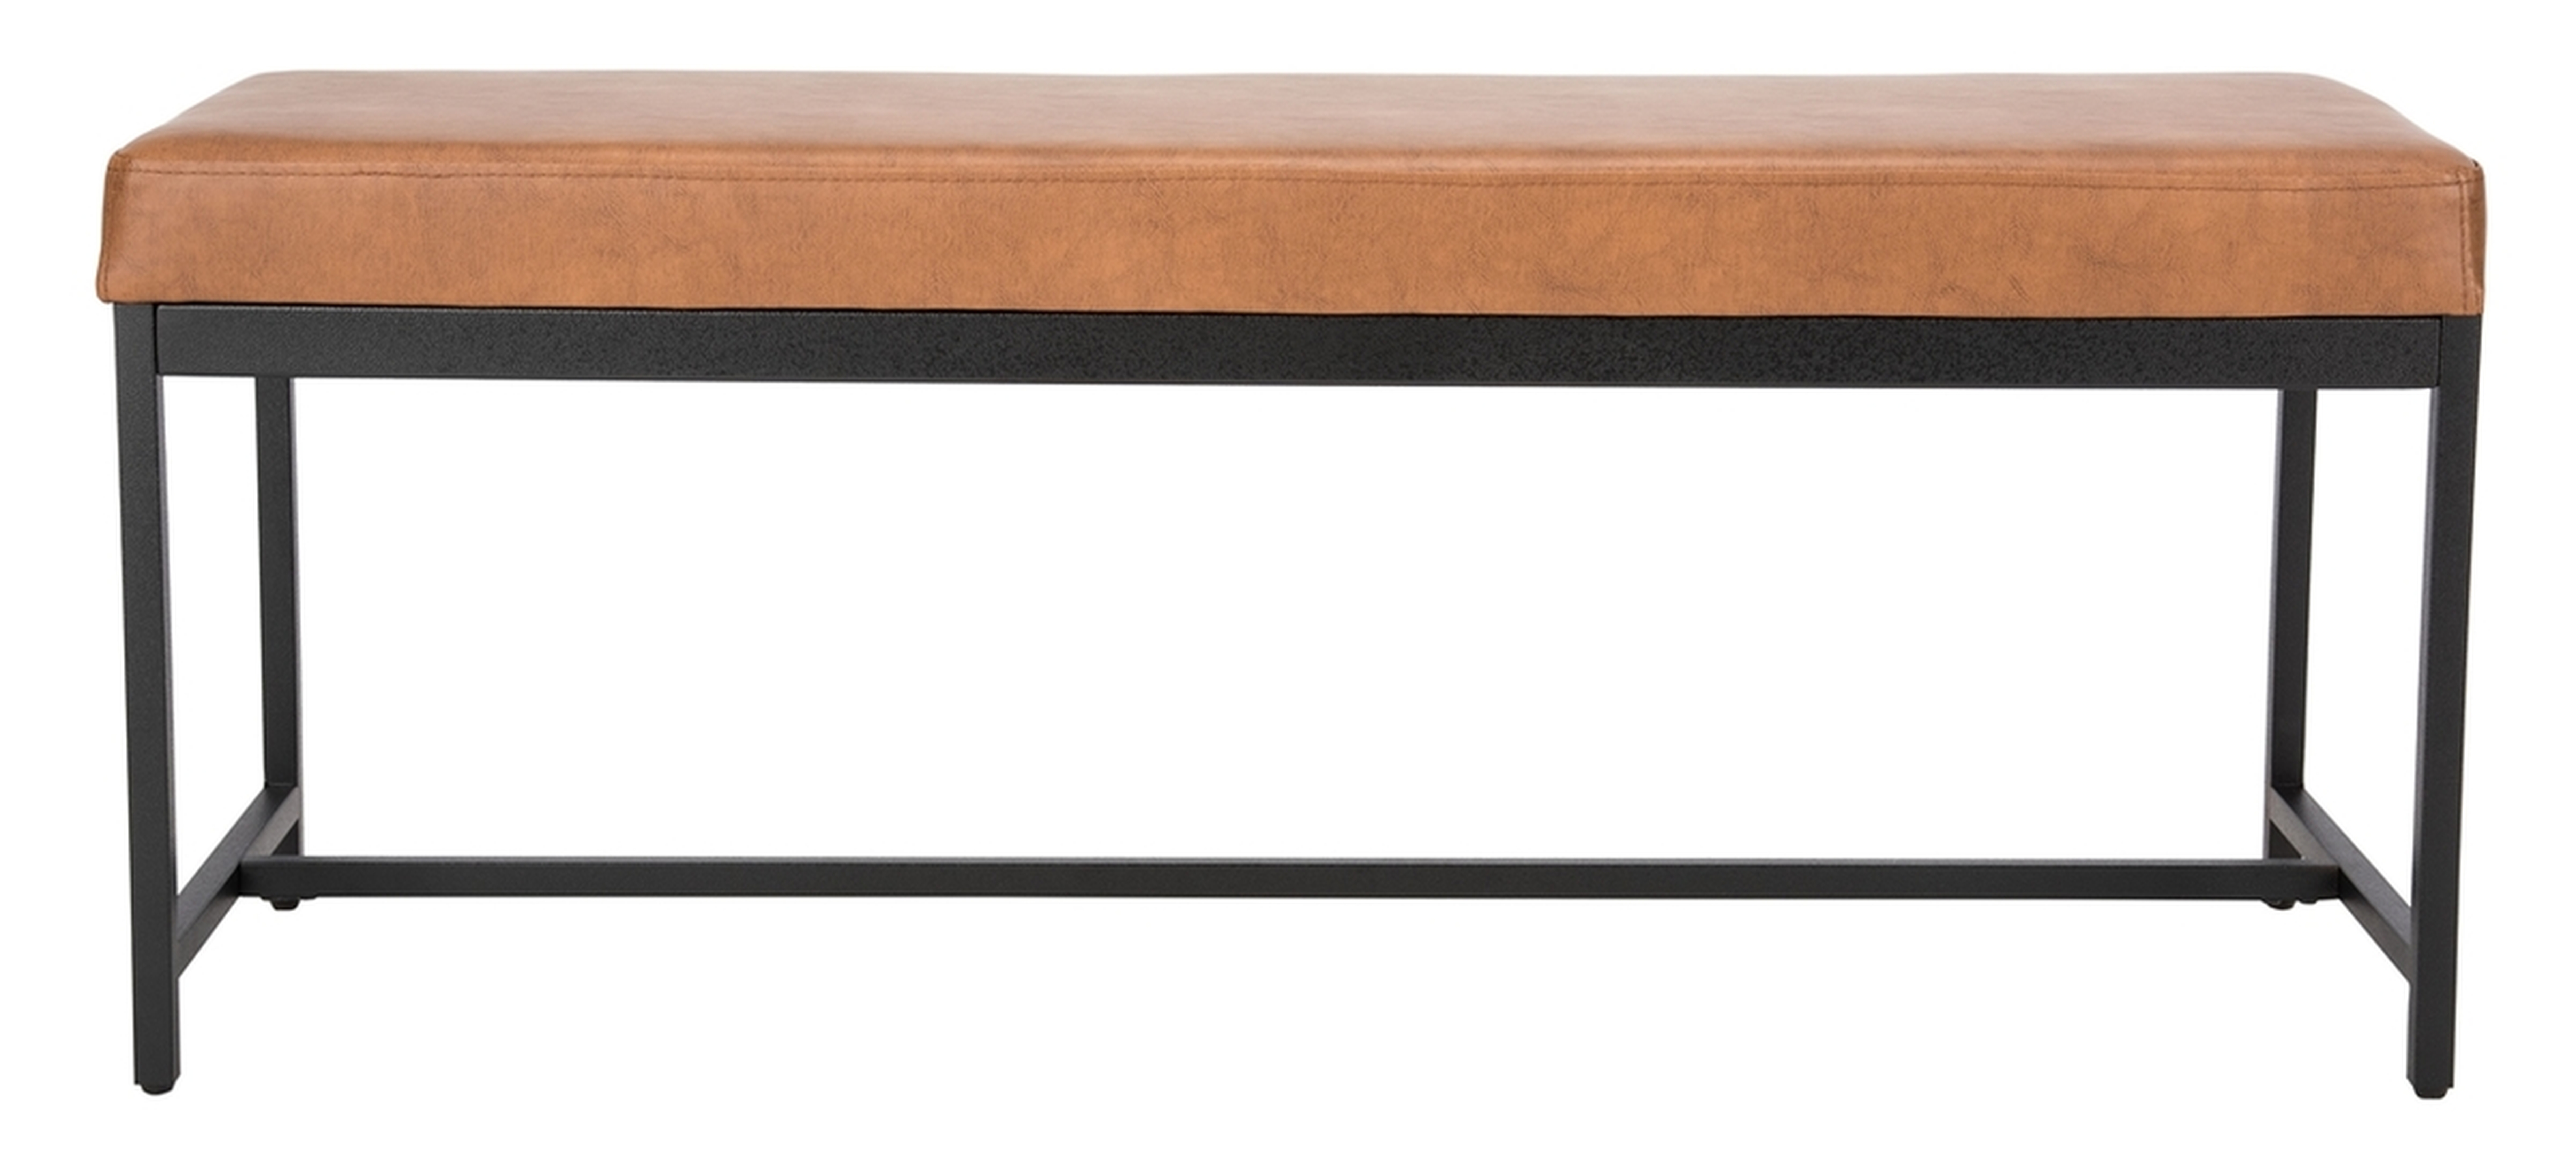 Chase Faux Leather Bench - Brown - Arlo Home - Arlo Home